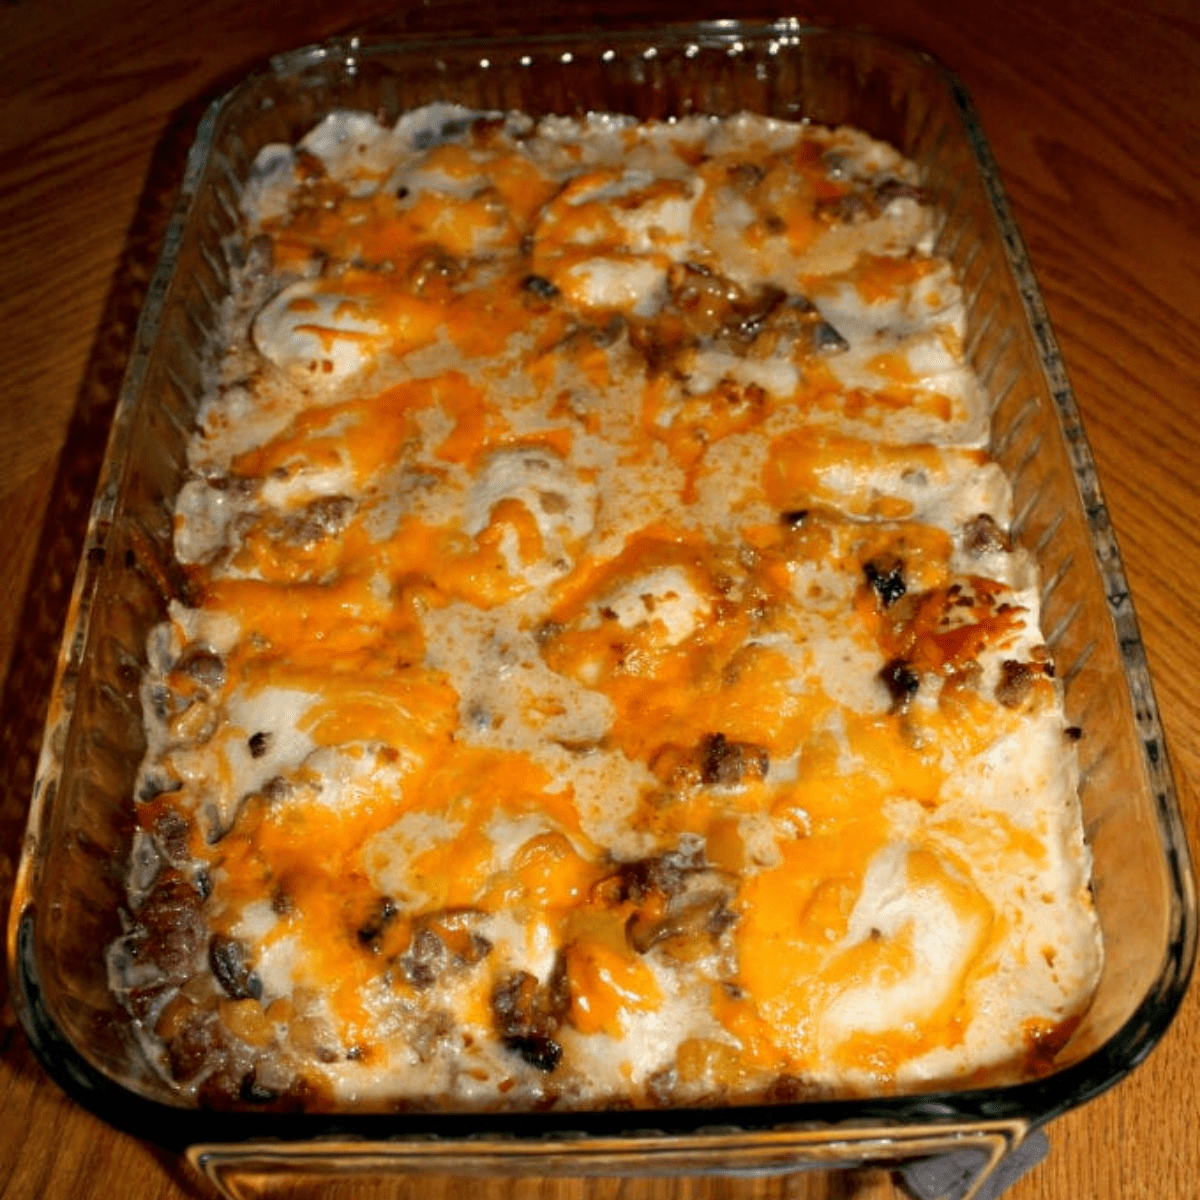 Pierogi casserole in a clear baking pan.  A metal spoon is scooping up a spoonful of the casserole.